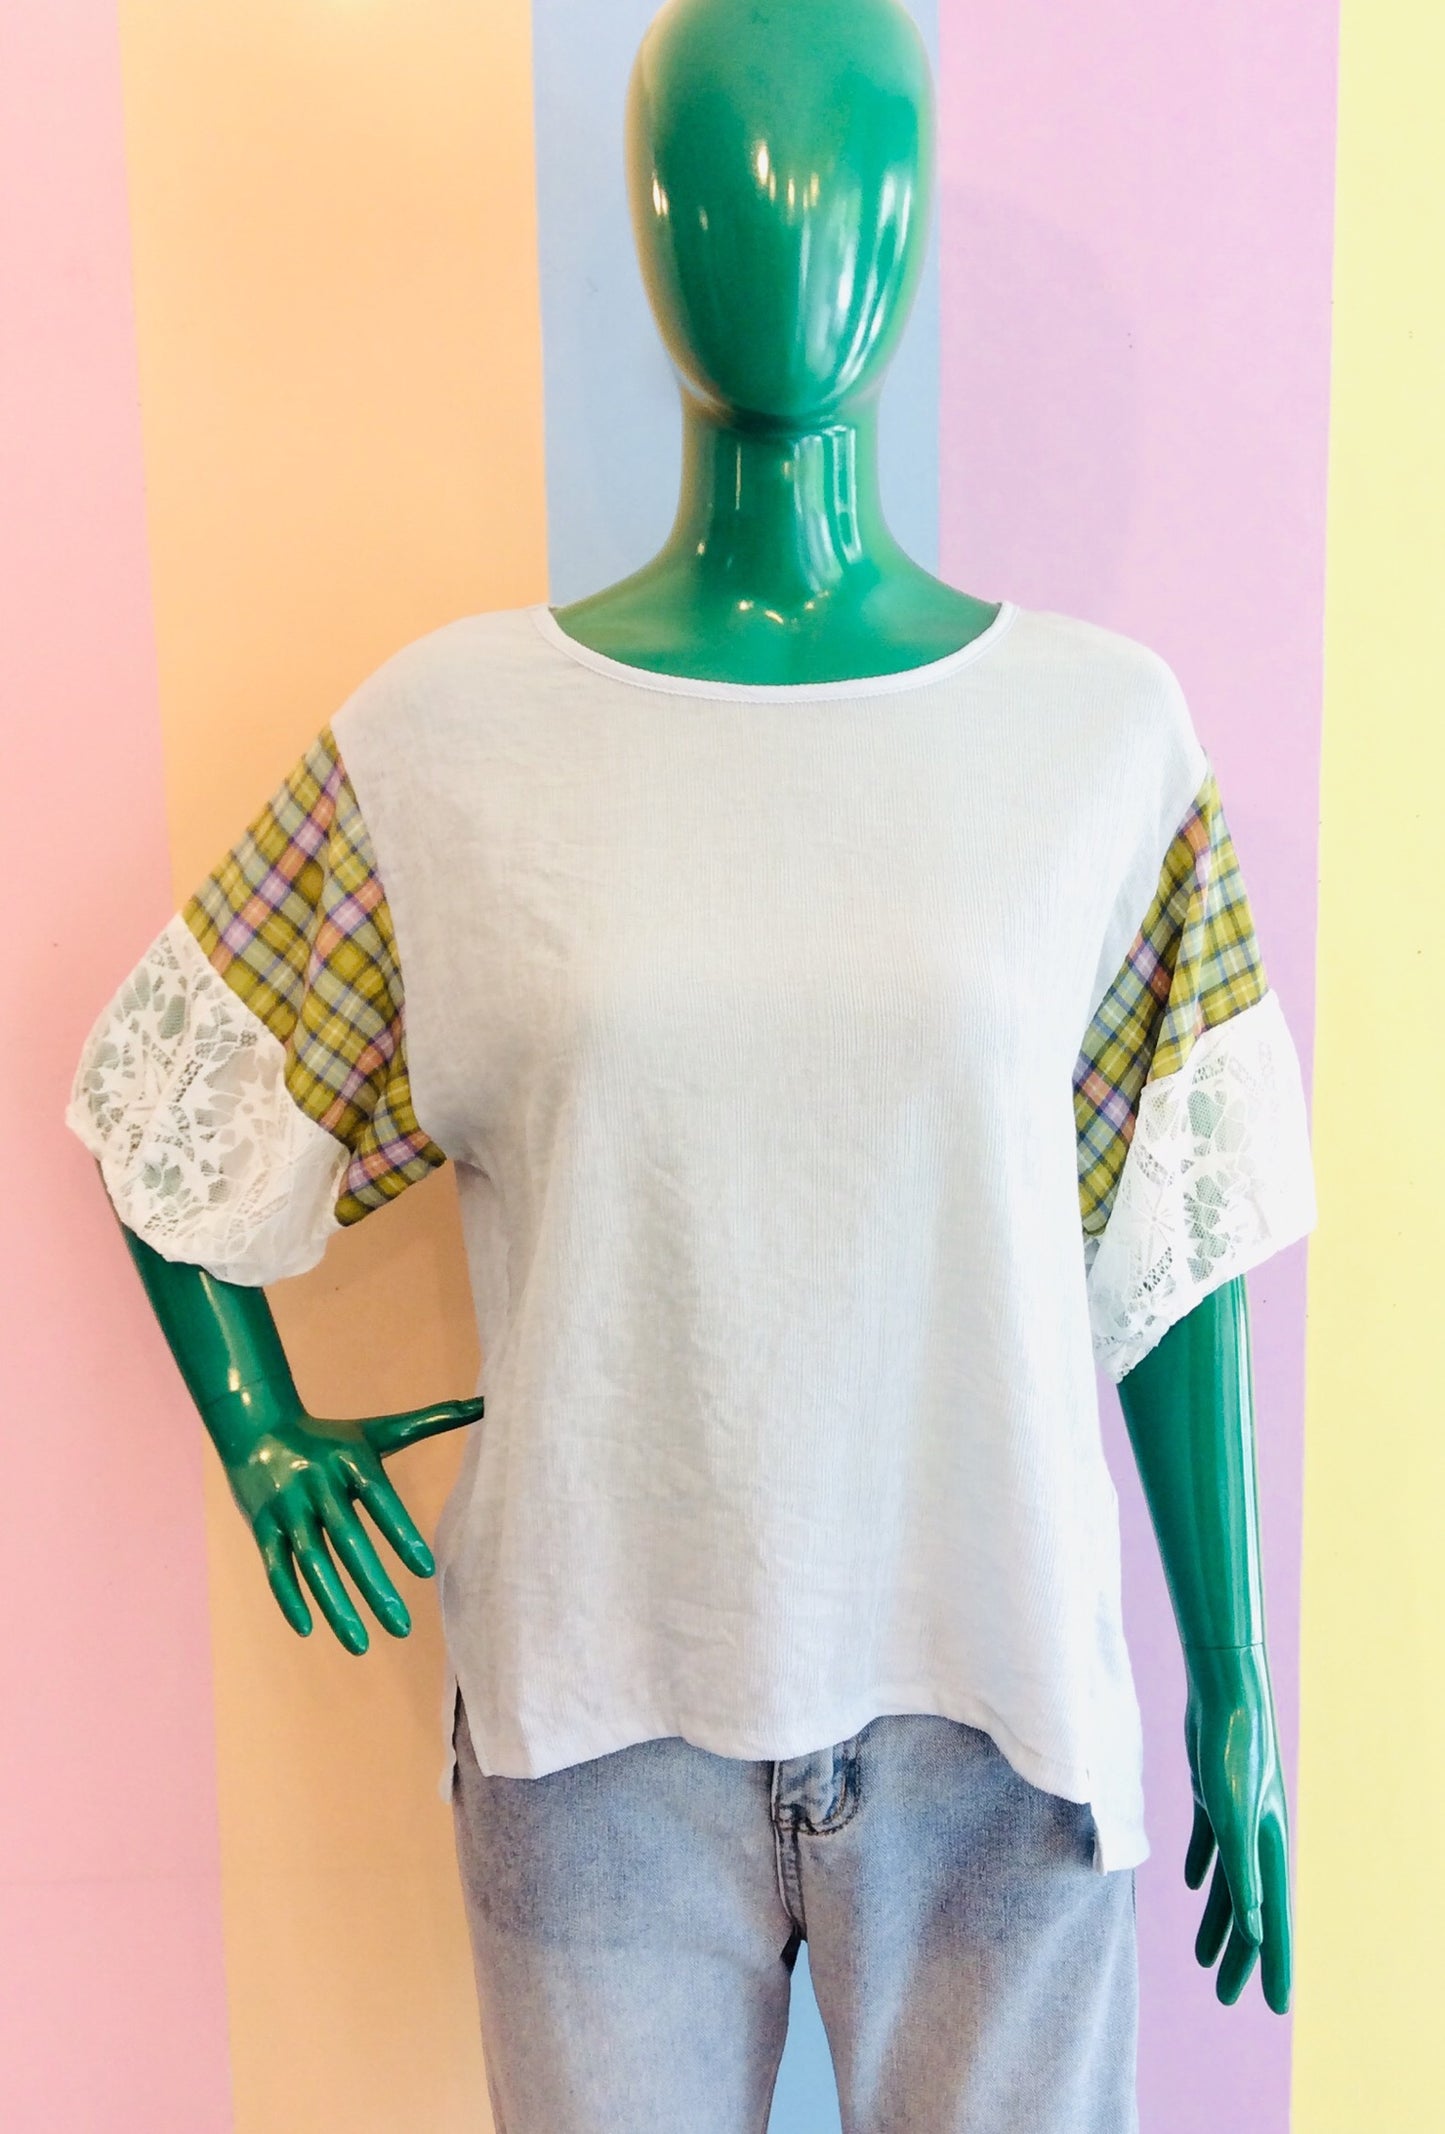 Pastel Top w/ Colorful Sleeve & Lace